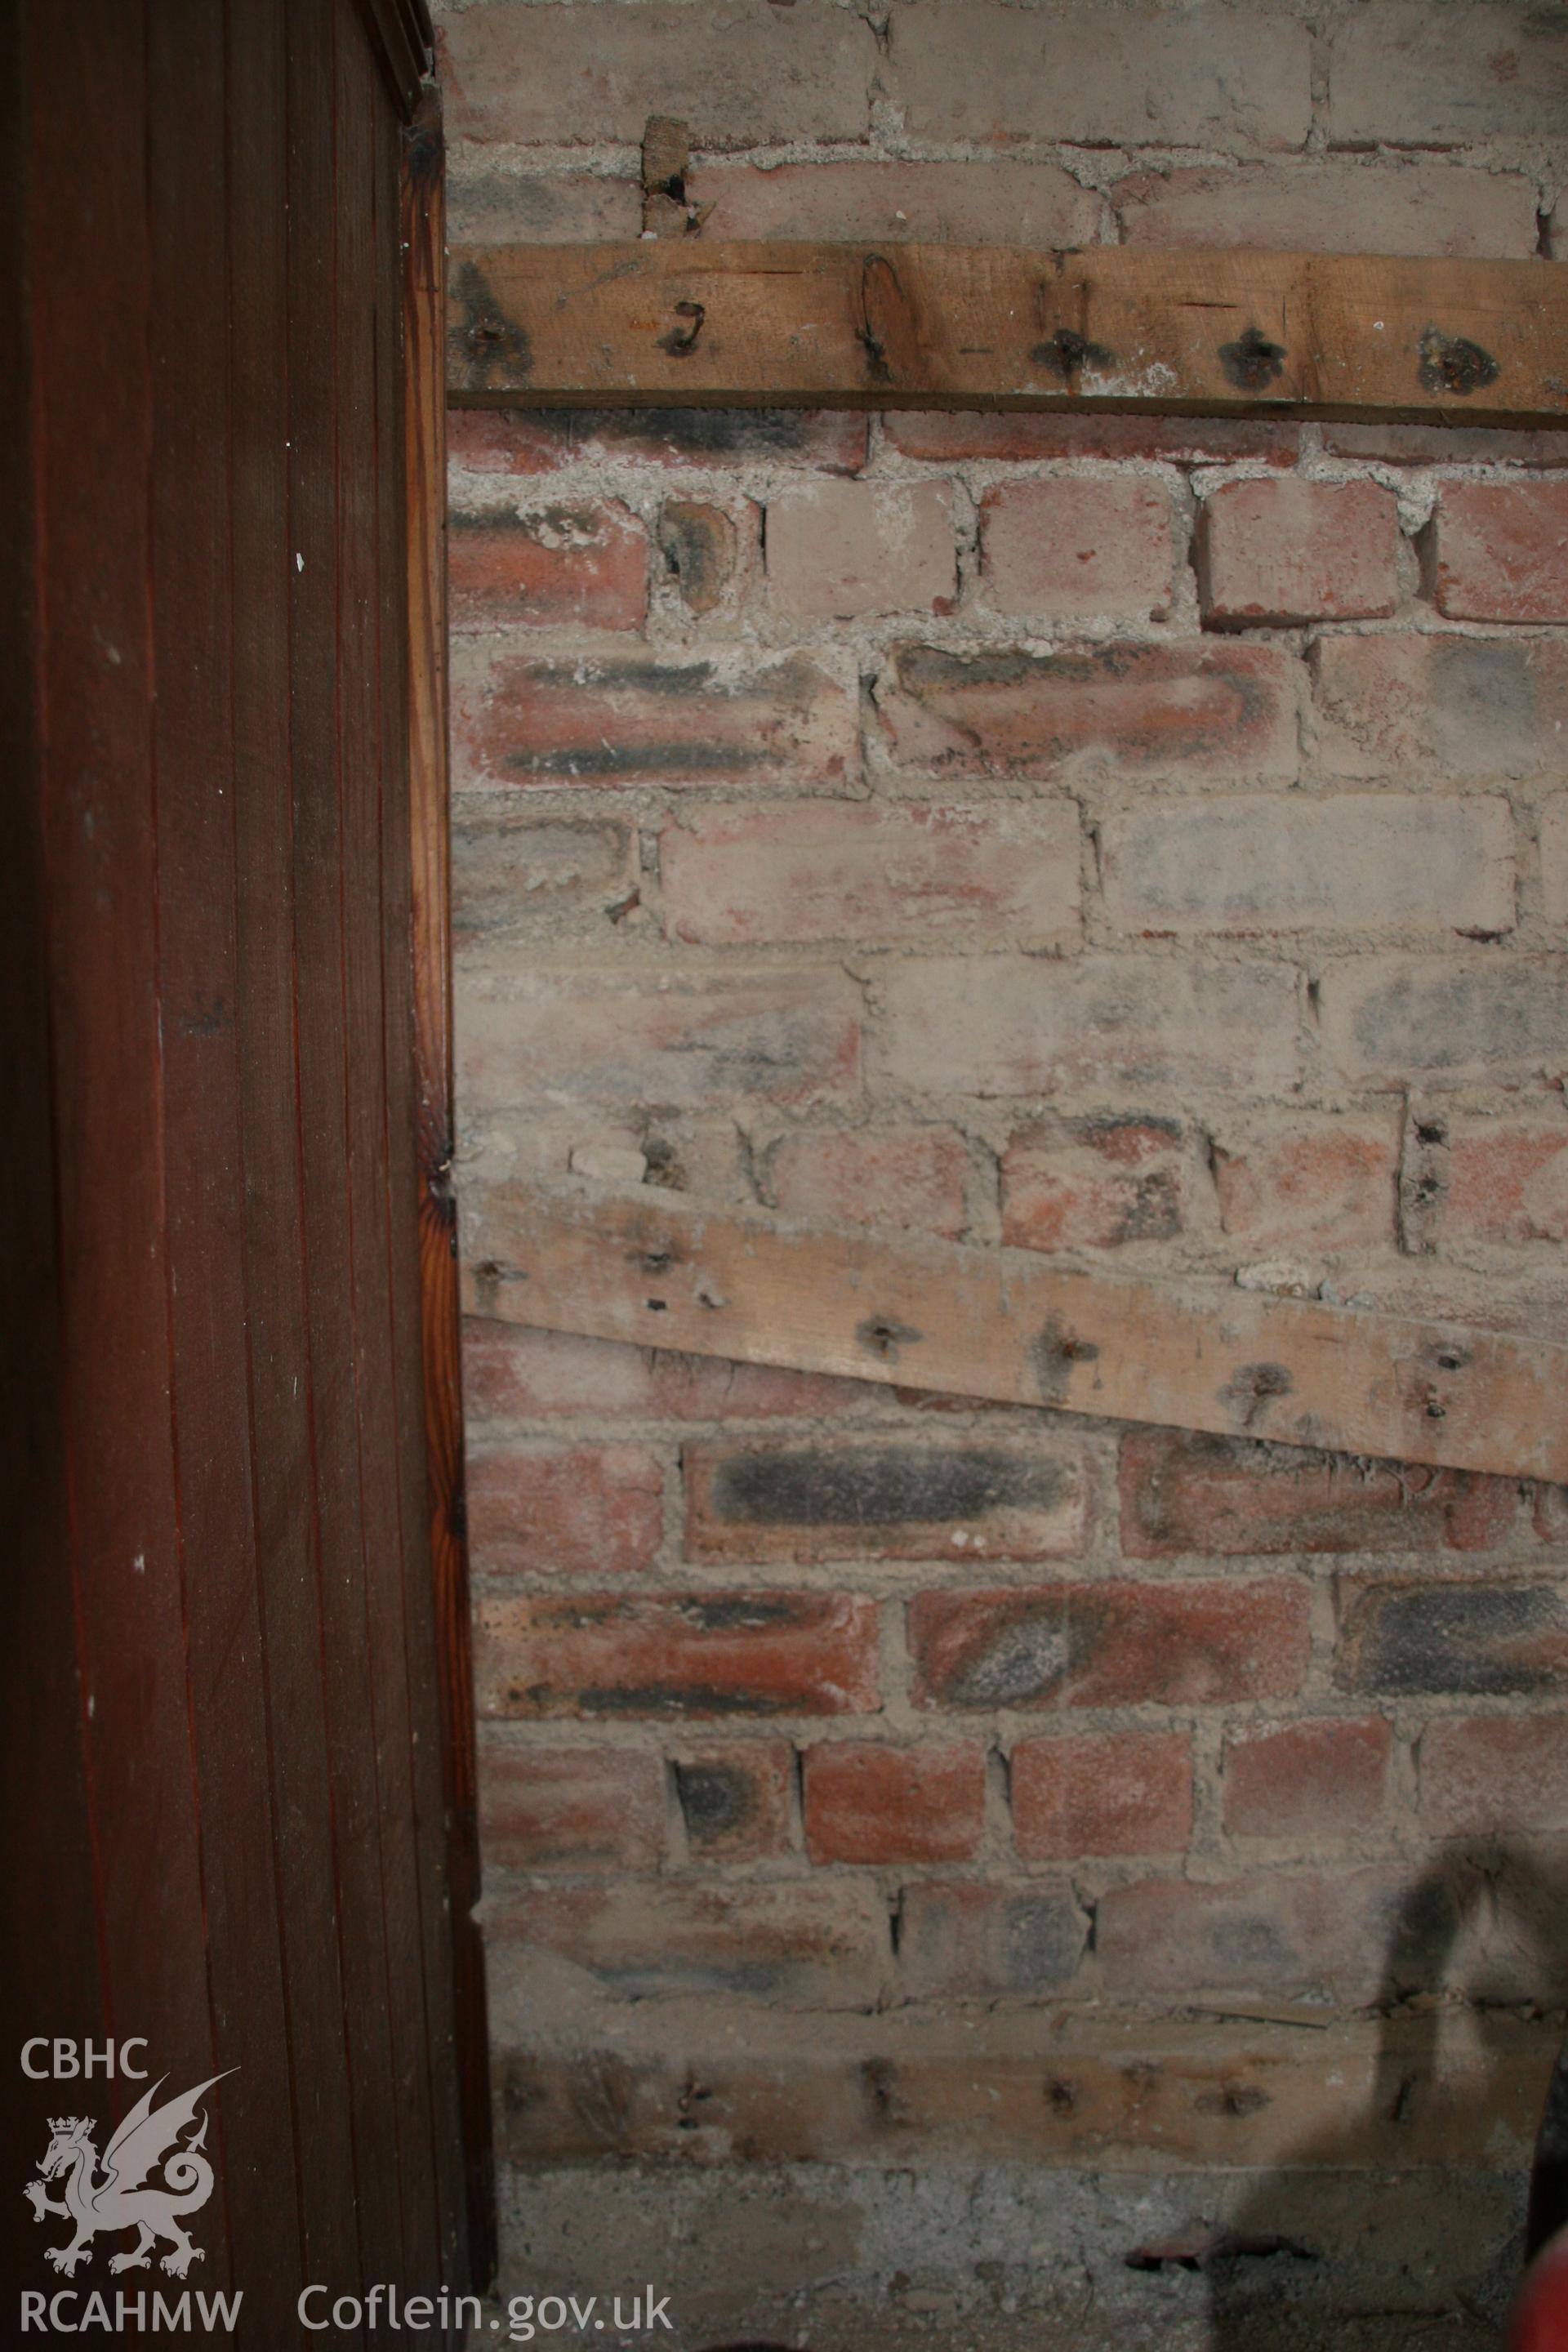 Photograph of internal brickwork behind vertical dado panelling in vestry at the former Llawrybettws Welsh Calvinistic Methodist chapel, Glanyrafon, Corwen. Produced by Tim Allen on 28th February 2019 to meet a condition attached to planning application.